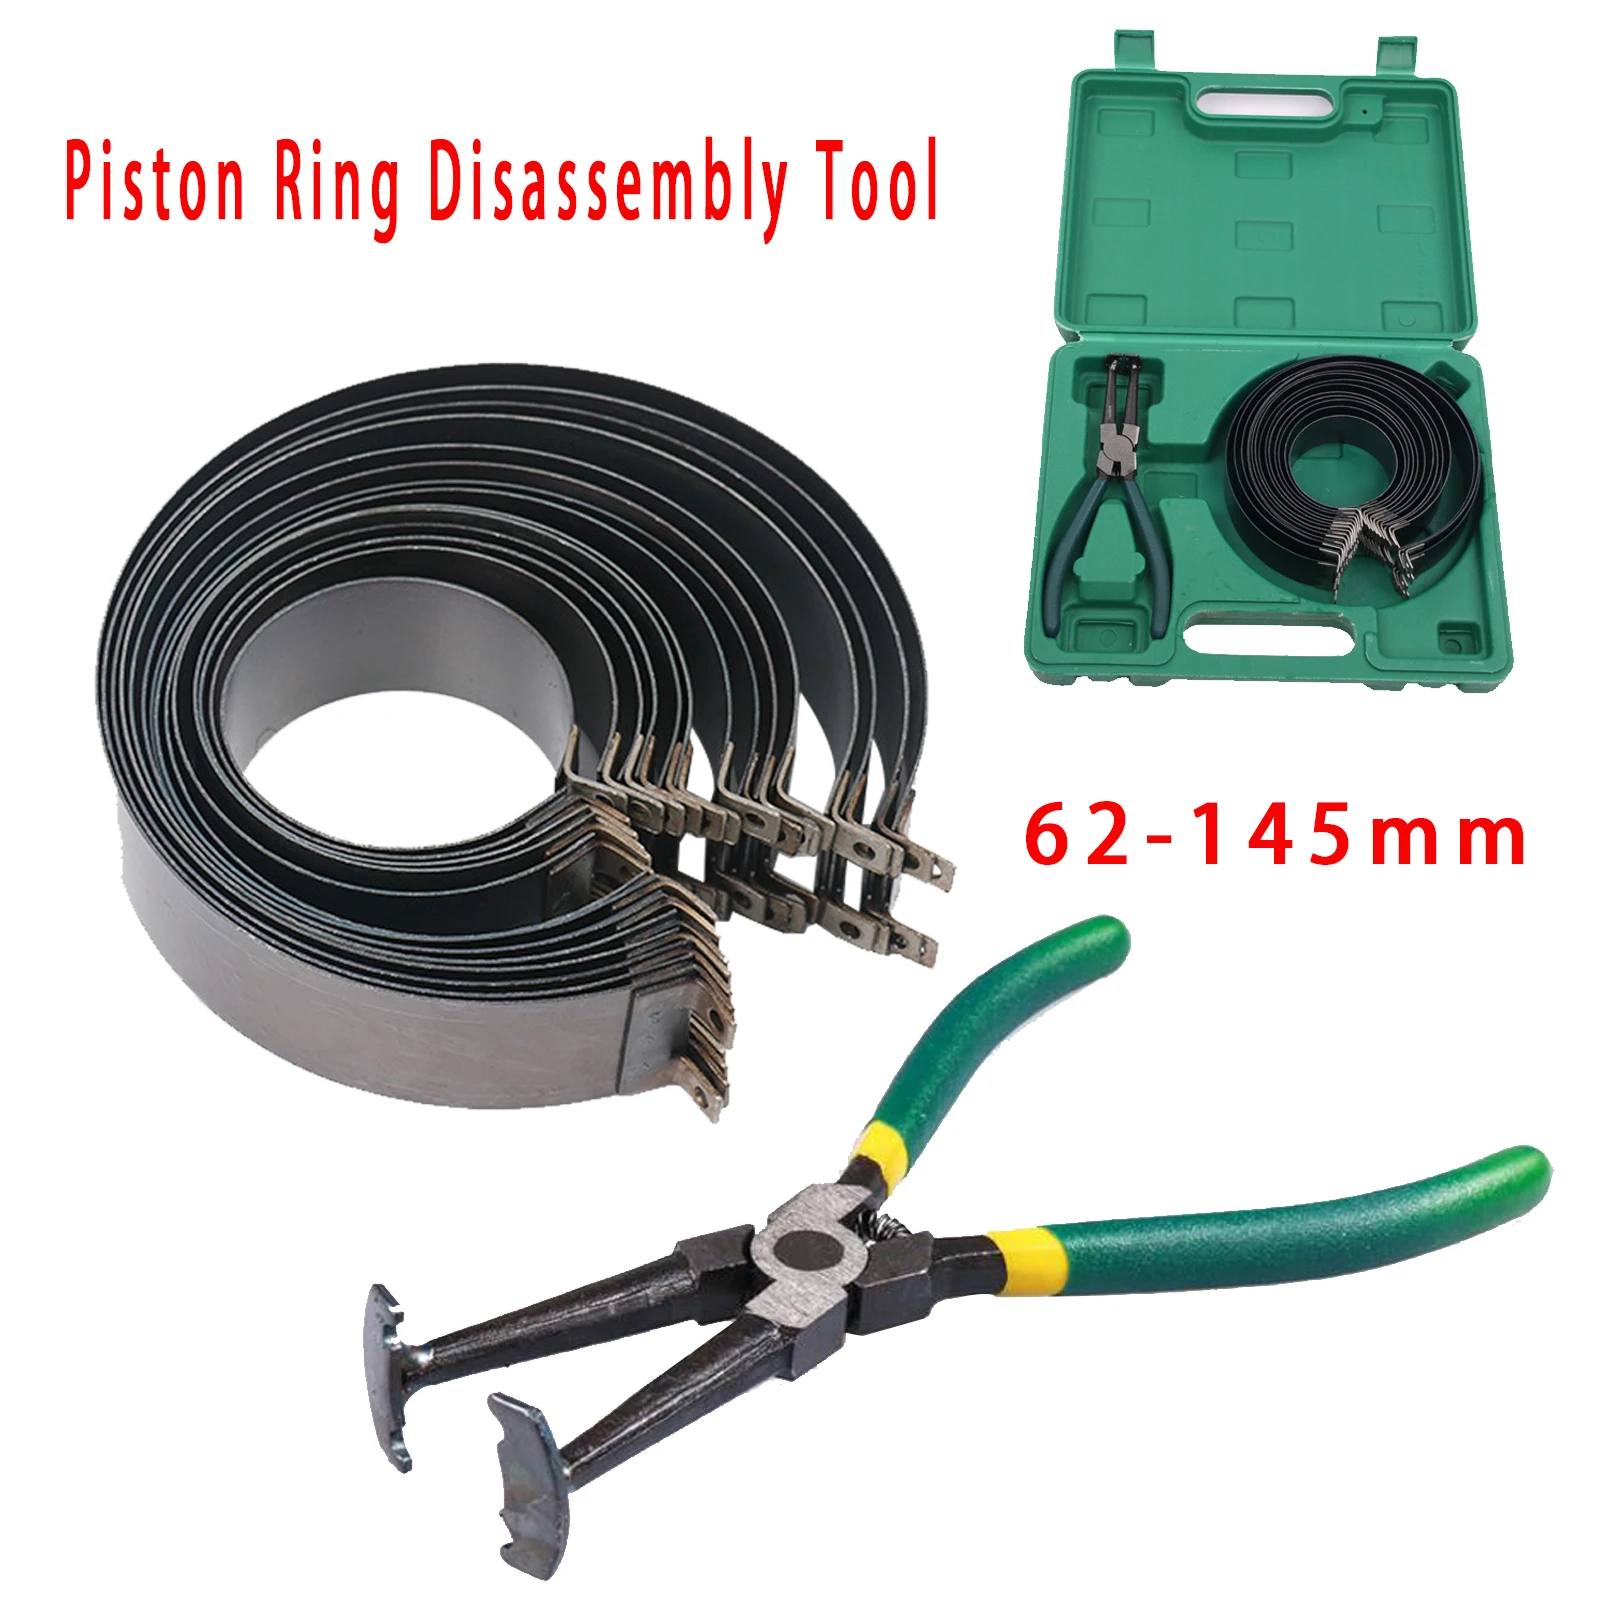 

15pcs/set of automobile piston pliers tool widened assembly pliers, piston ring compressor, piston ring disassembly tool Repair